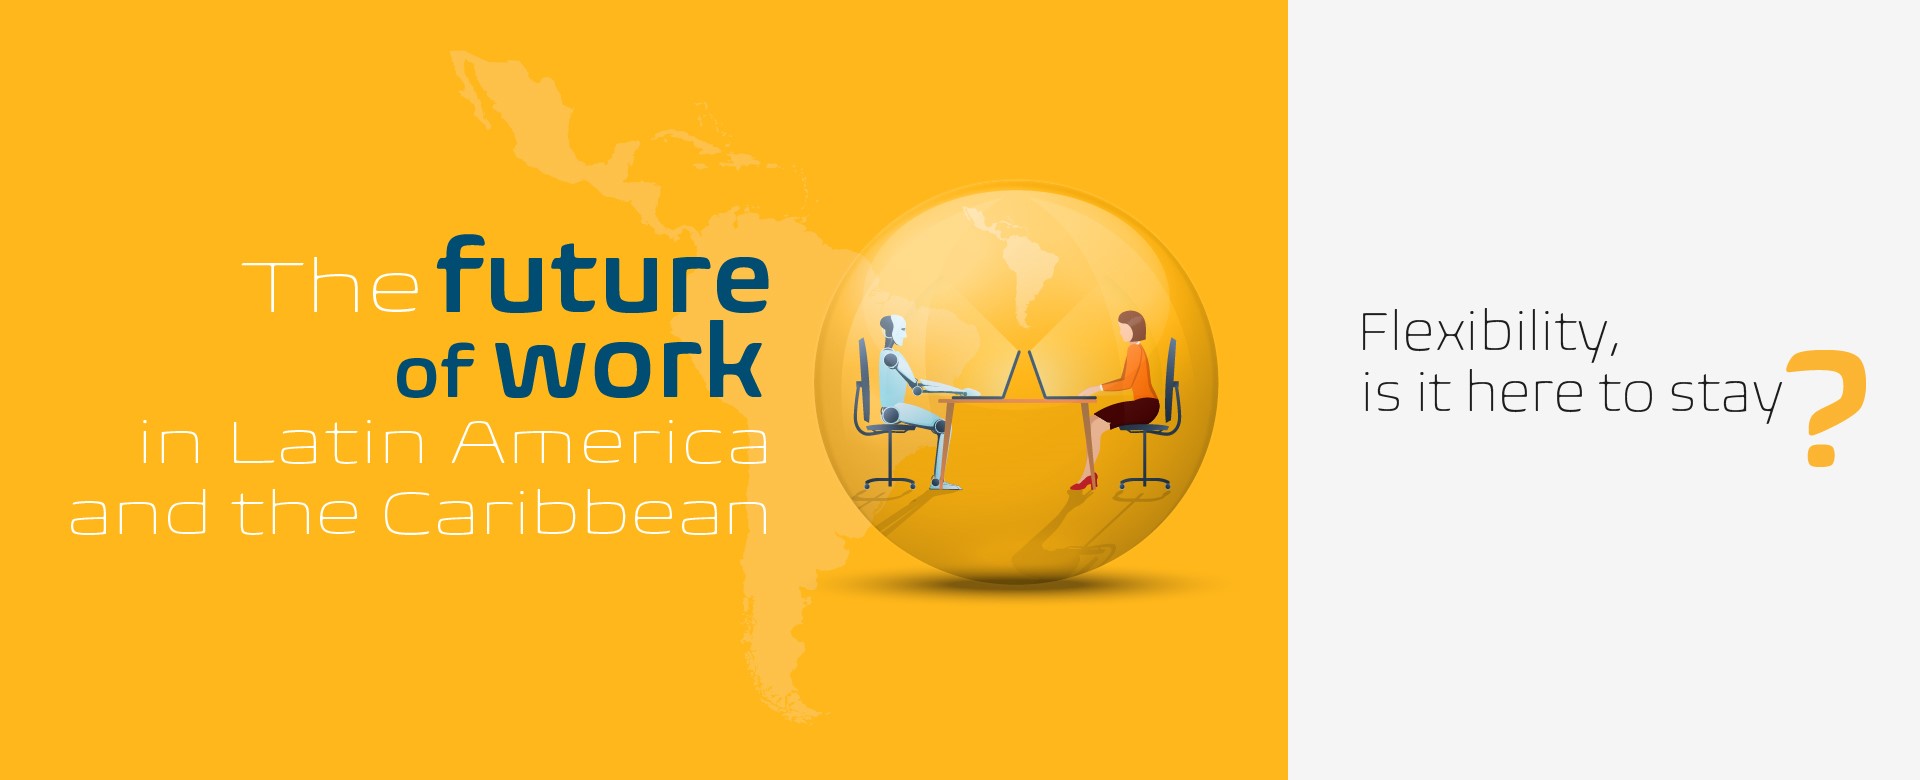 THE FUTURE OF WORK IN LATIN AMERICA AND THE CARIBBEAN